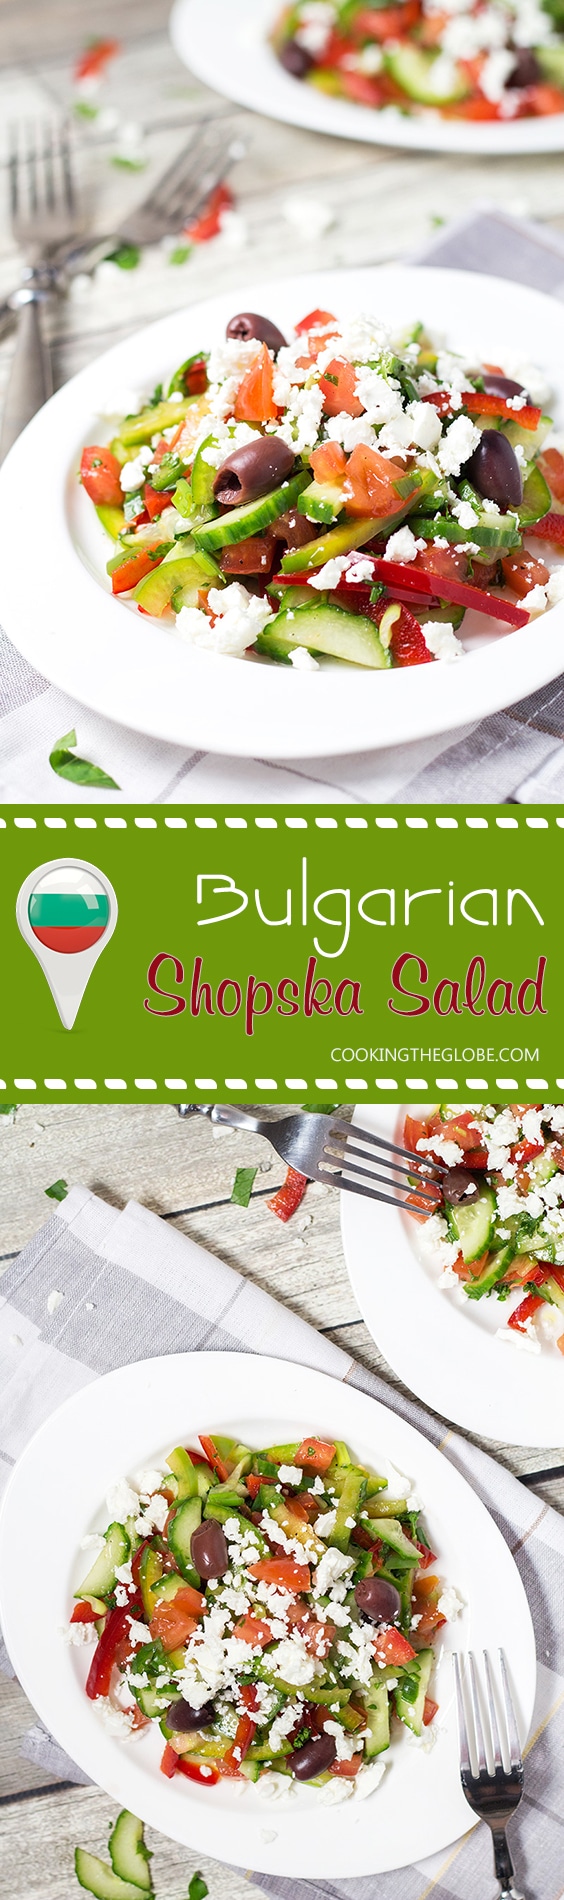 This colorful Bulgarian Shopska Salad is loaded with veggies! Perfect for hot summer days! | cookingtheglobe.com